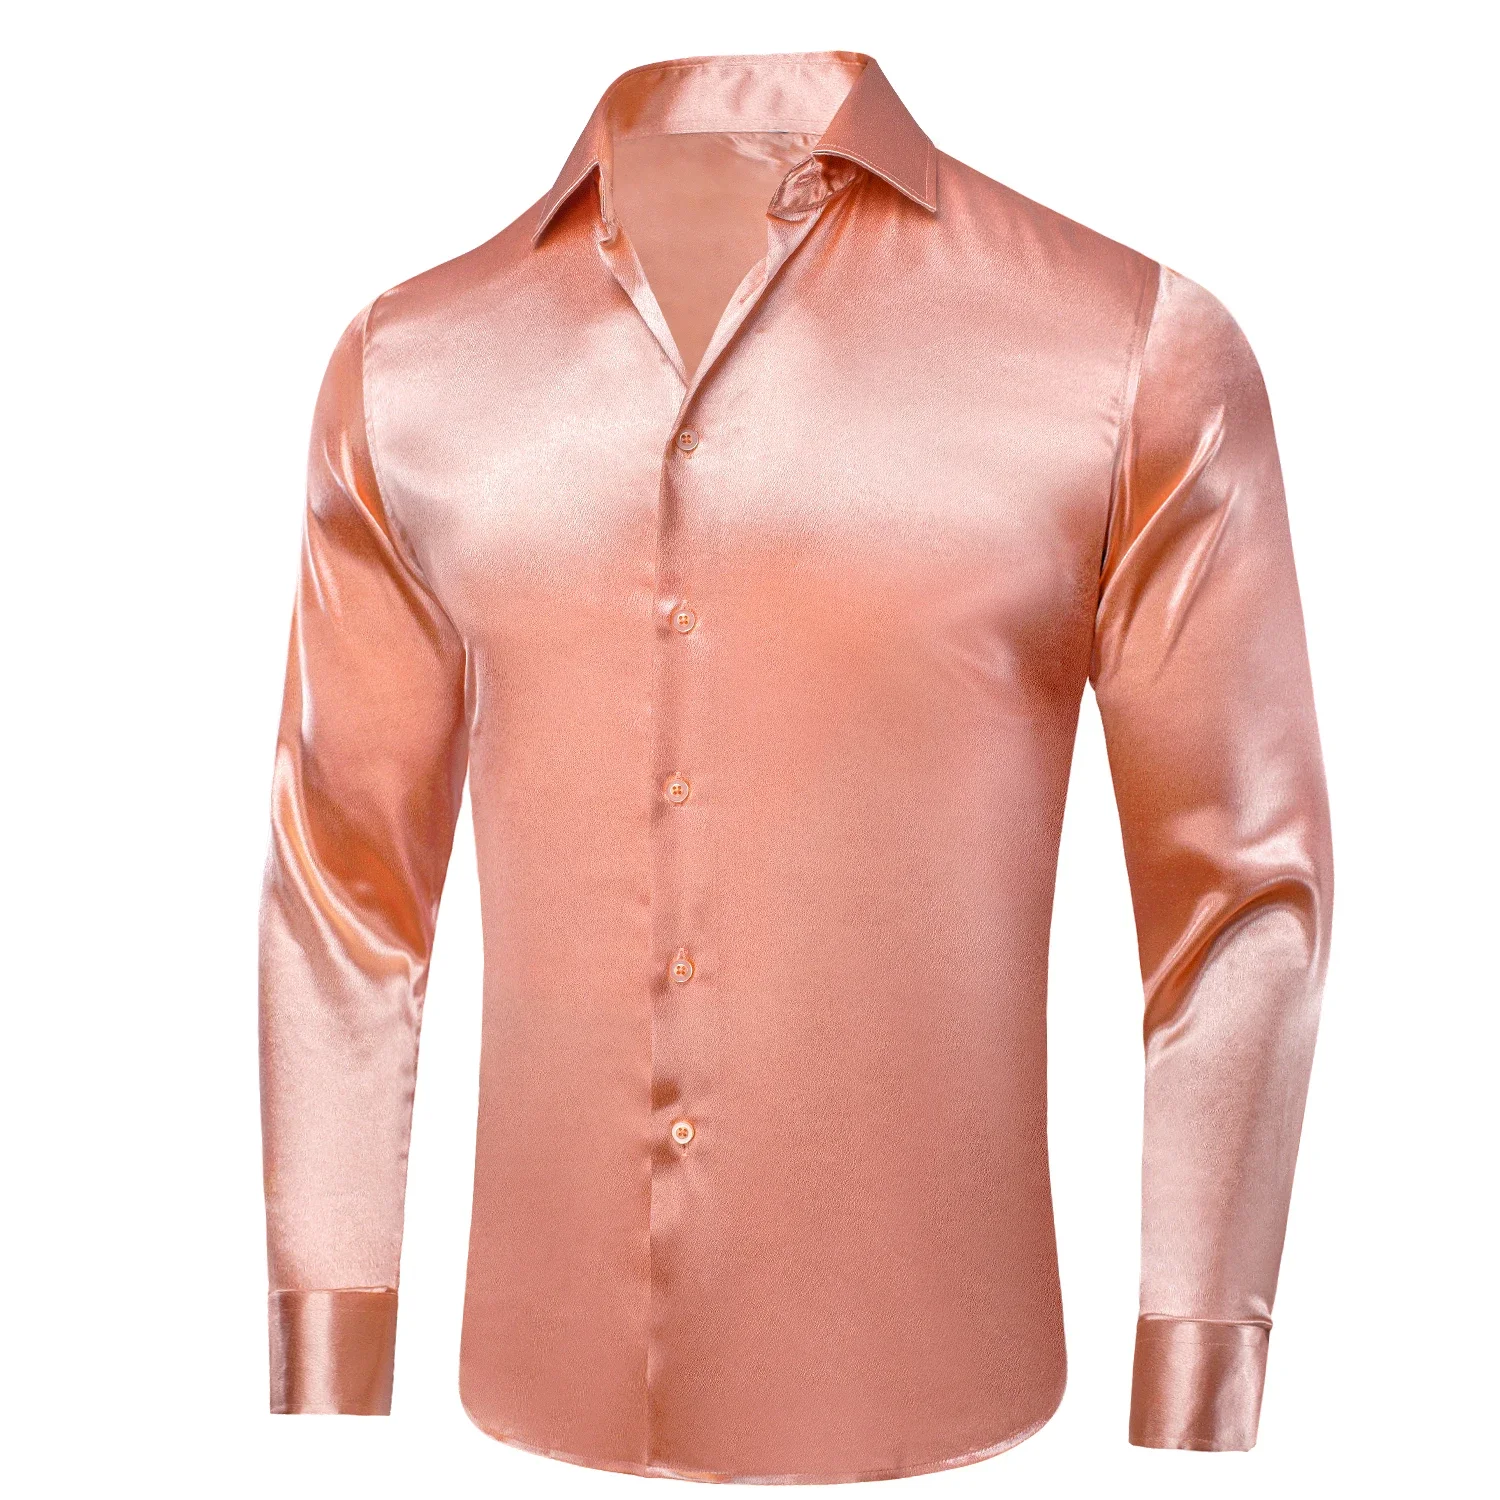 

Hi-Tie Plain Satin Silk Mens Dress Shirts Long Sleeve Suit Shirt Casual Formal Blouse Pure Solid Rose Gold Peach Pink Mint White